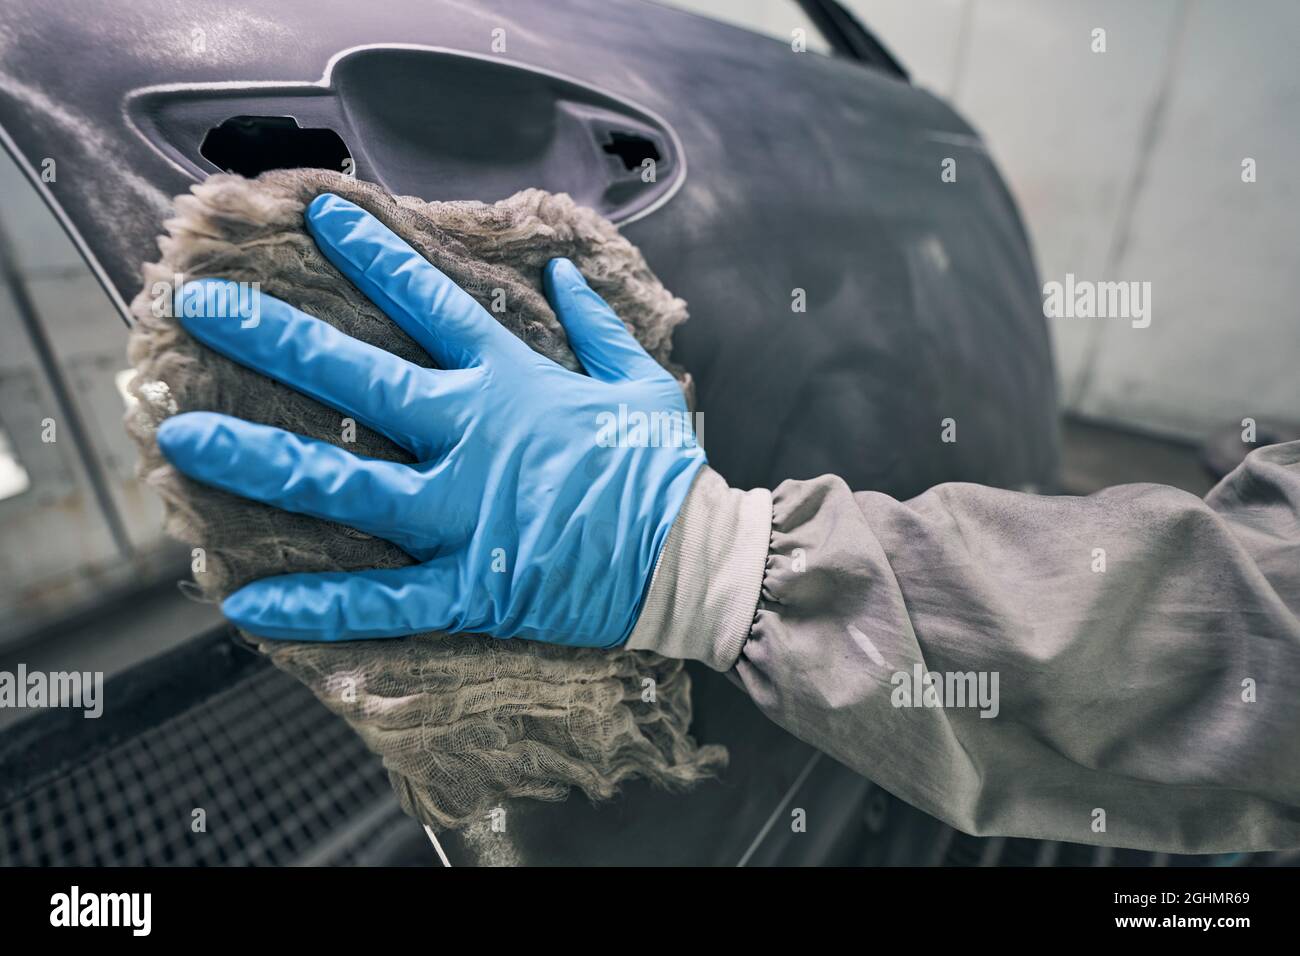 Person in rubber glove wiping car with rag Stock Photo